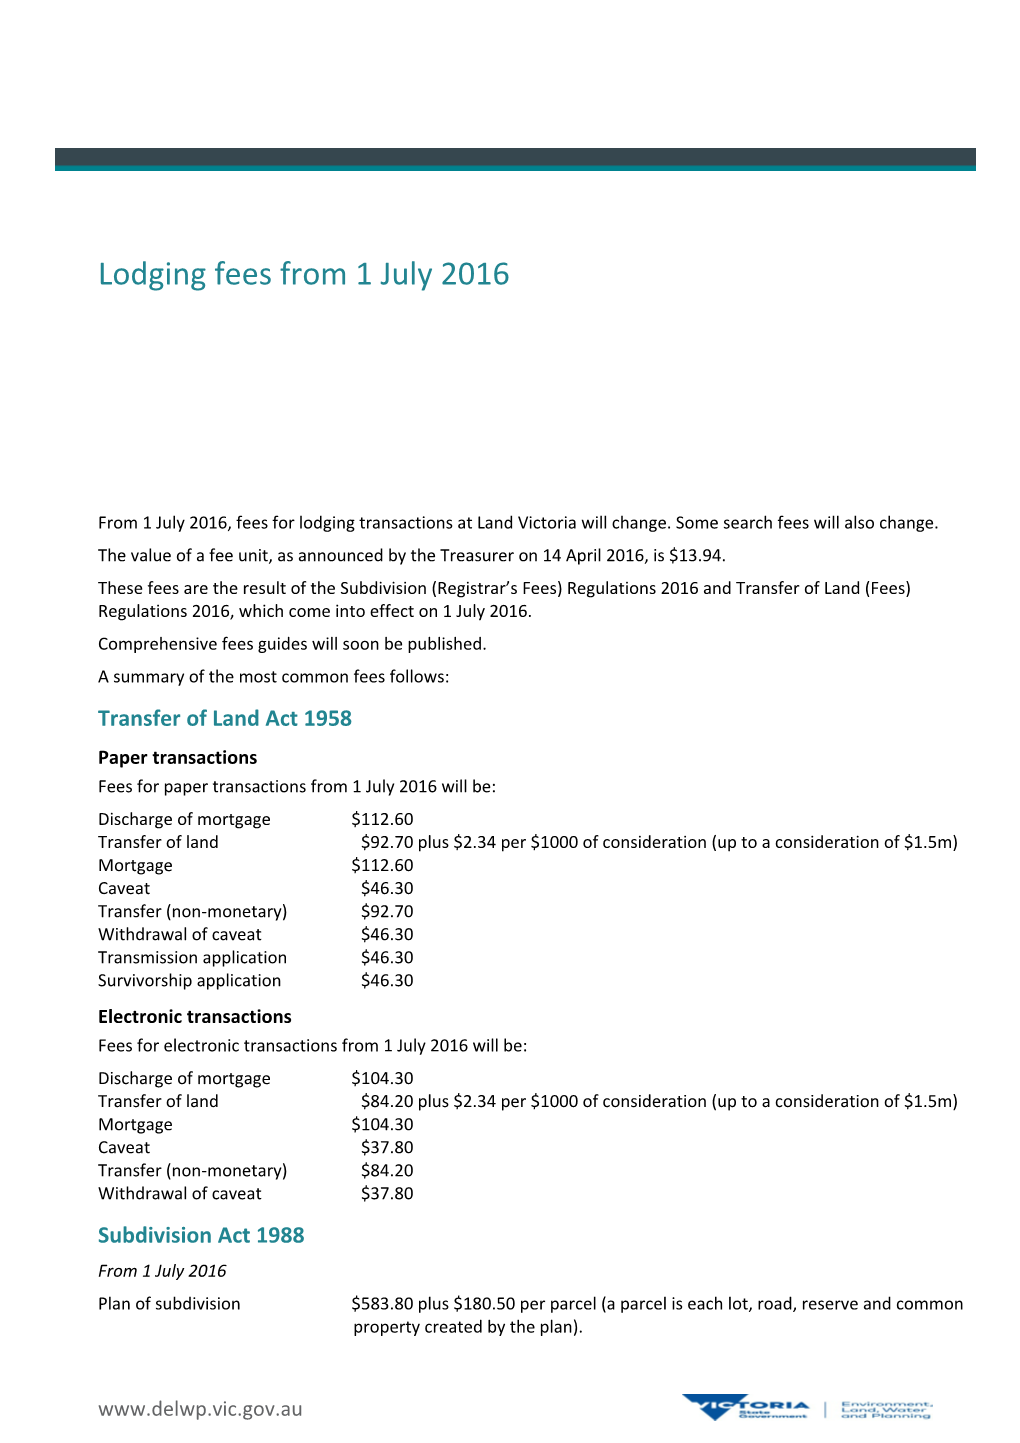 Lodging Fees from 1 July 2016